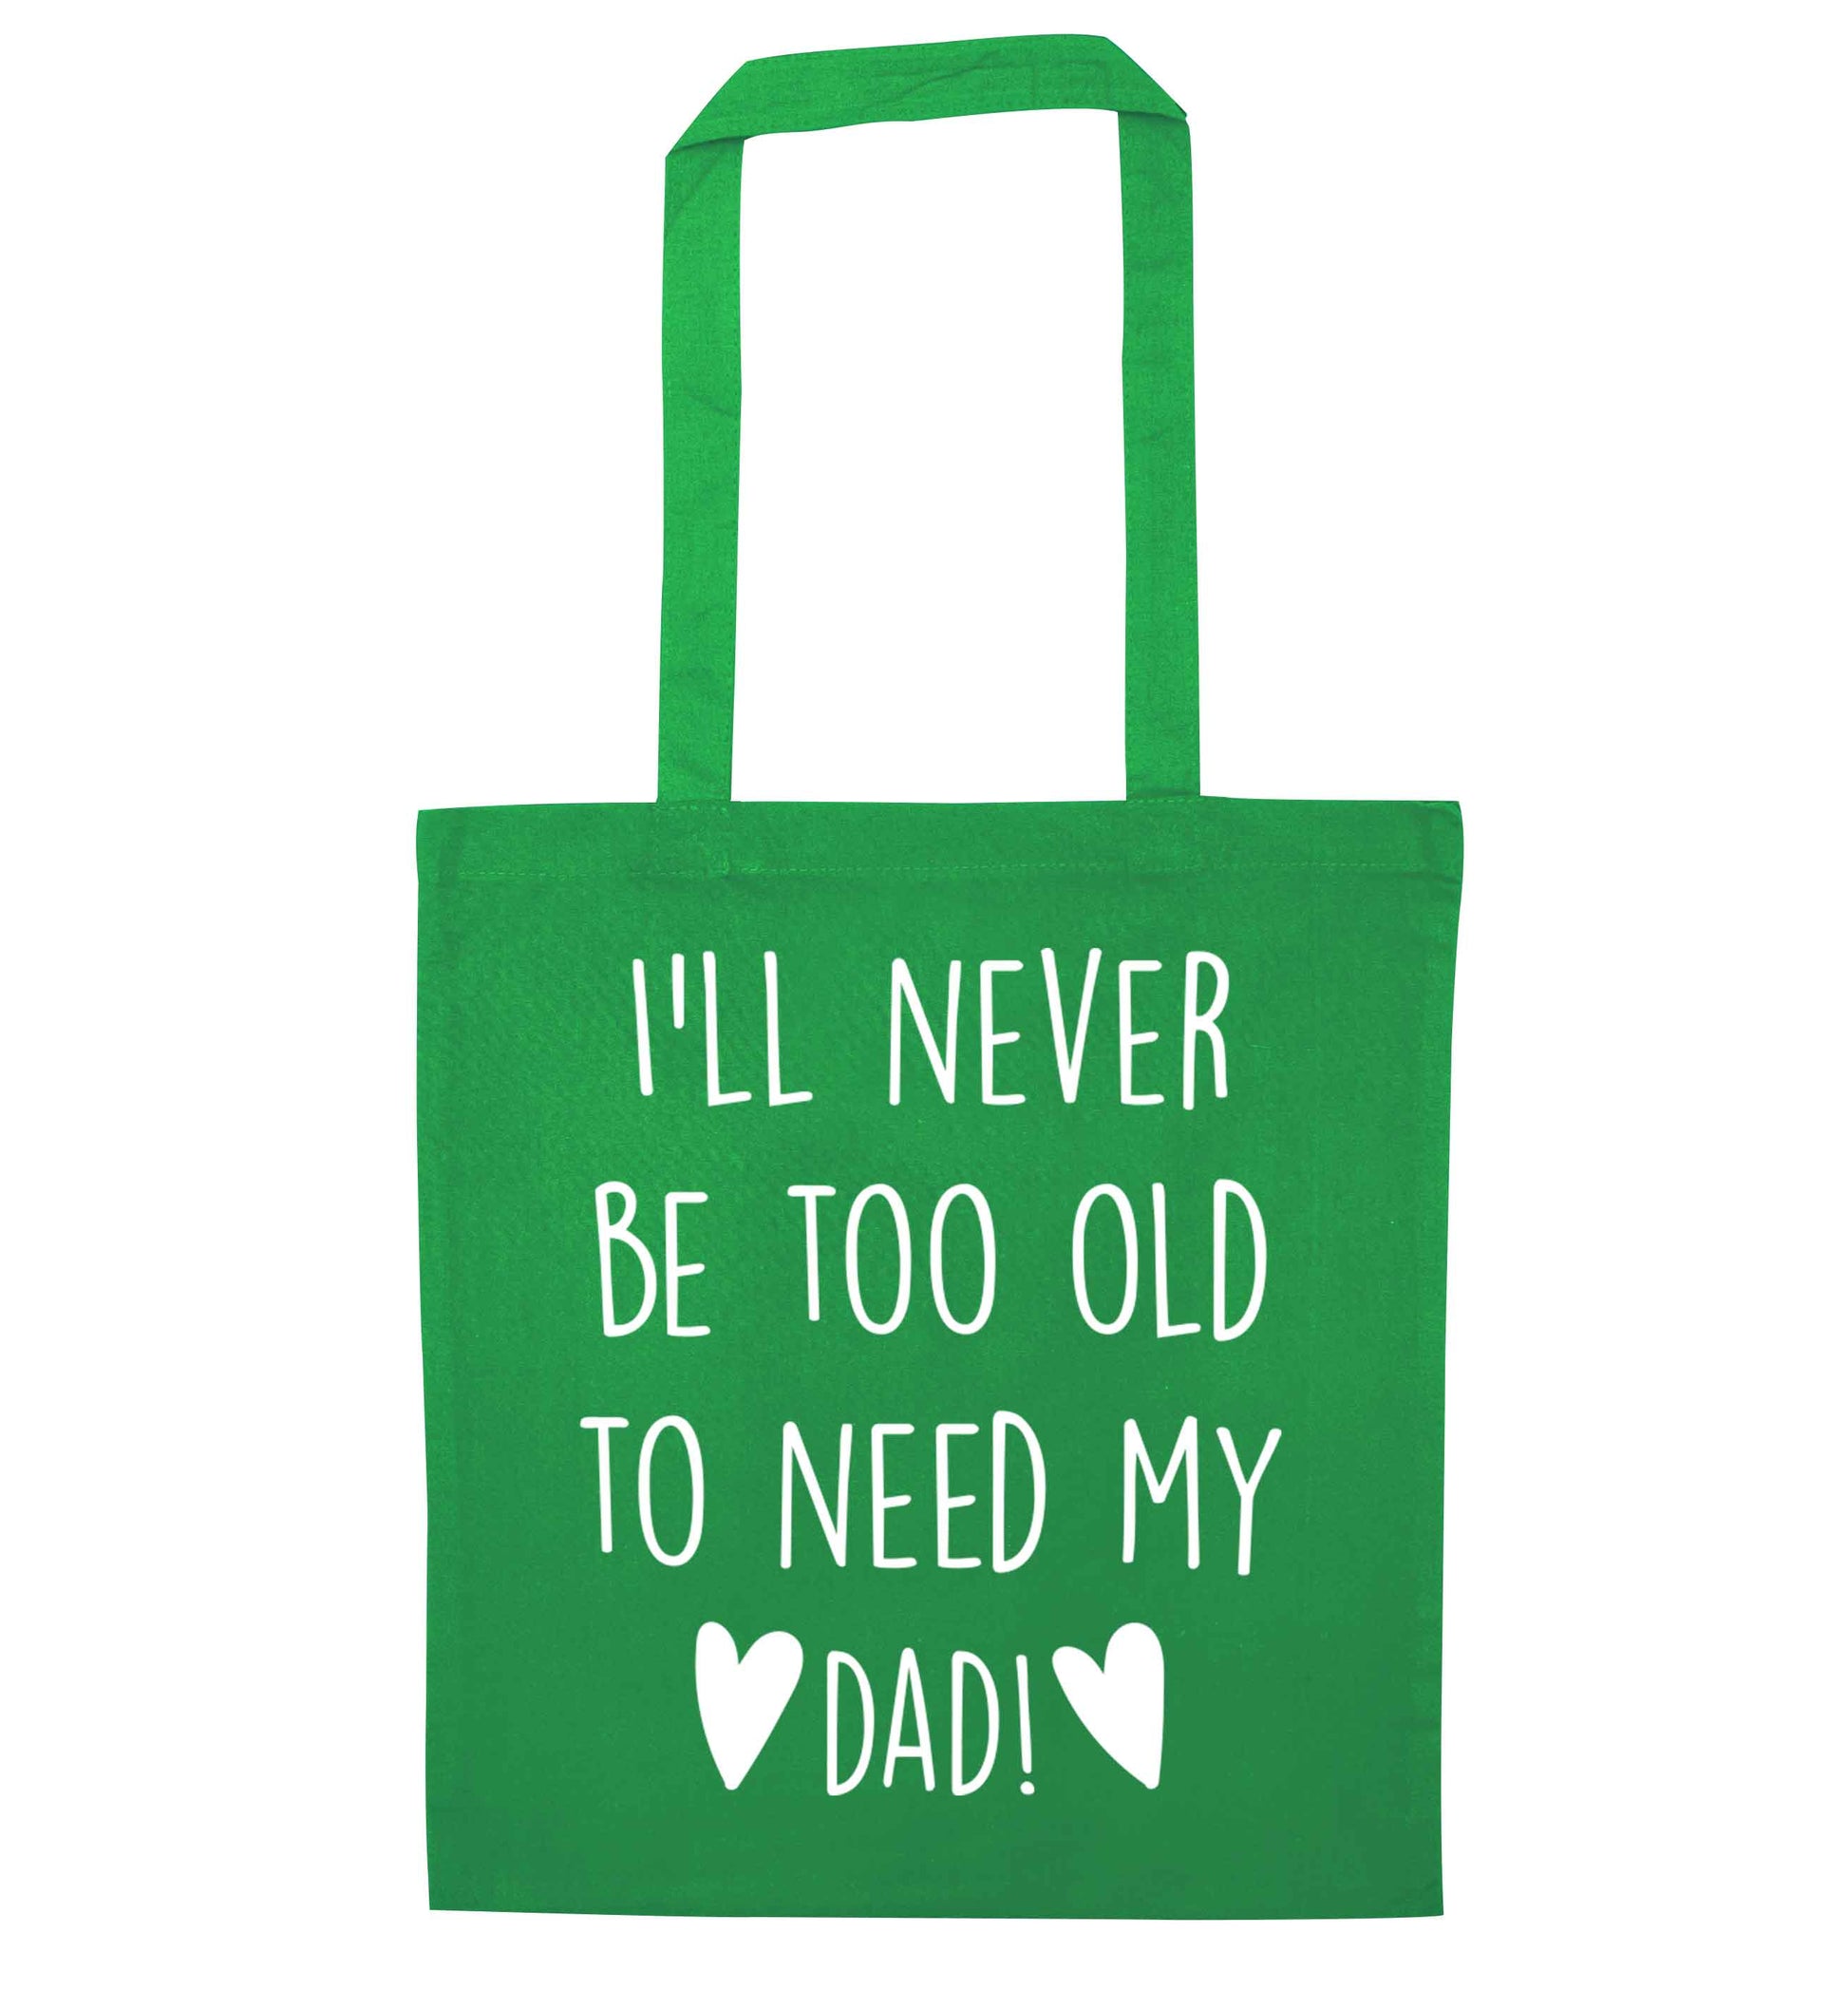 I'll never be too old to need my dad green tote bag